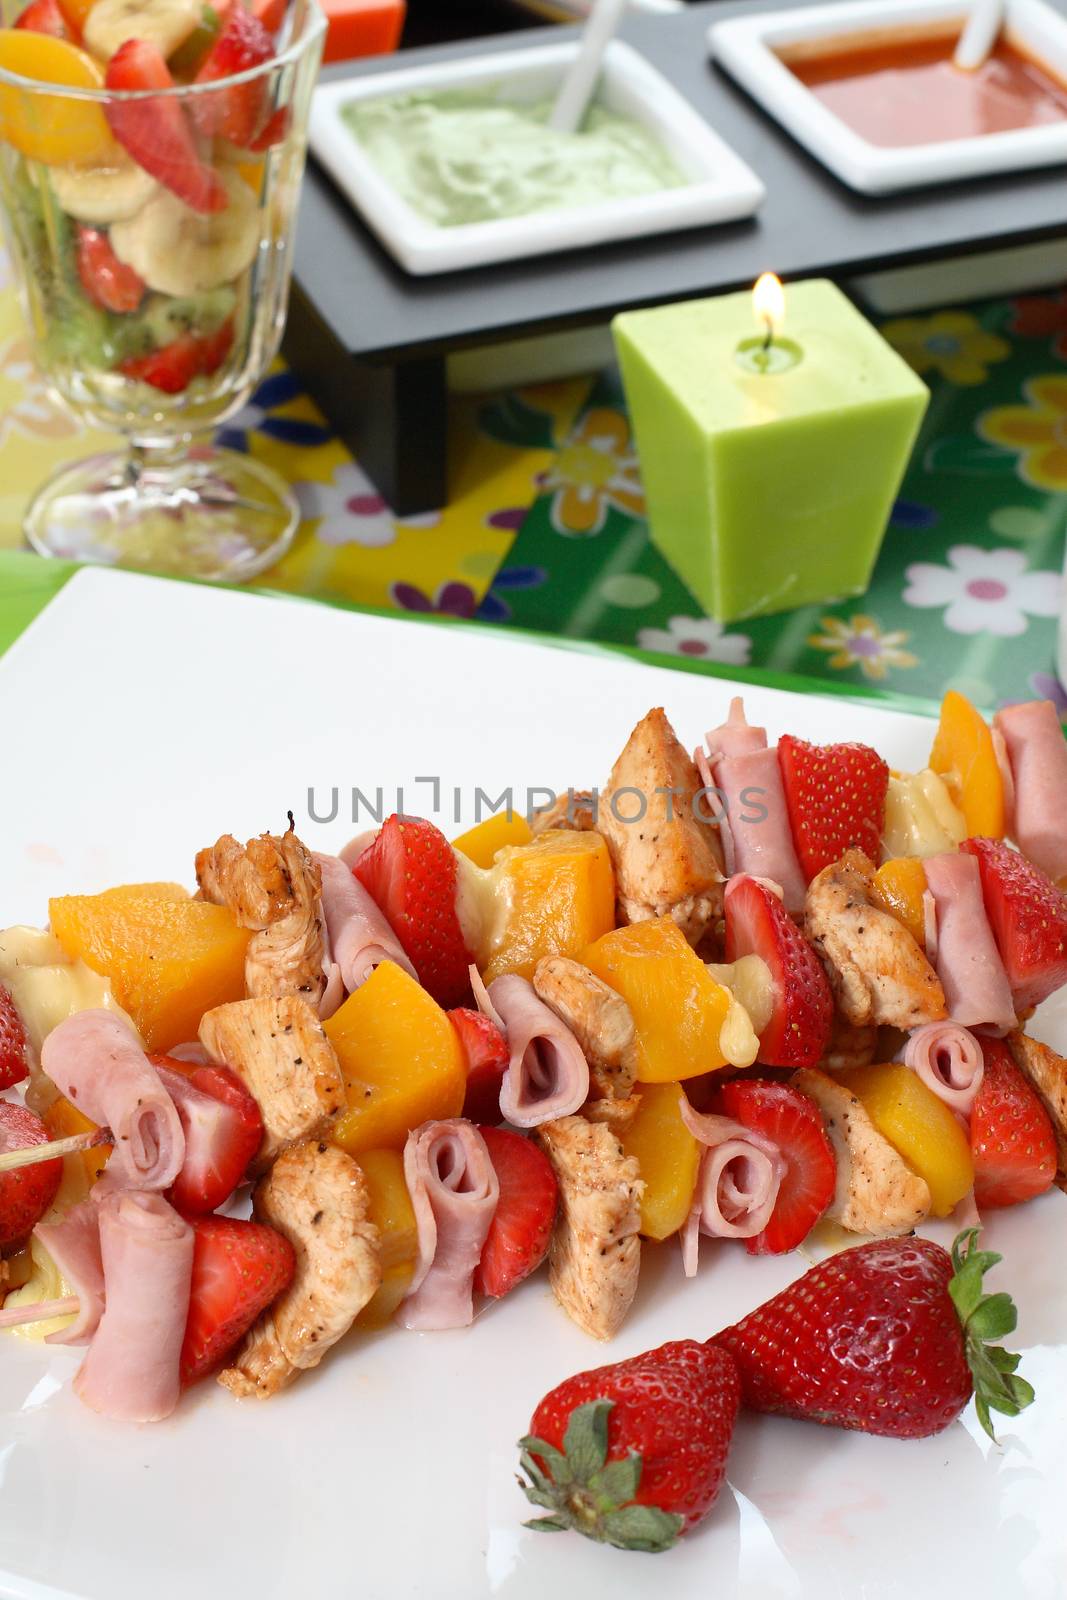 Colorful skewers of chicken, strawberries and pineapple on a white plate